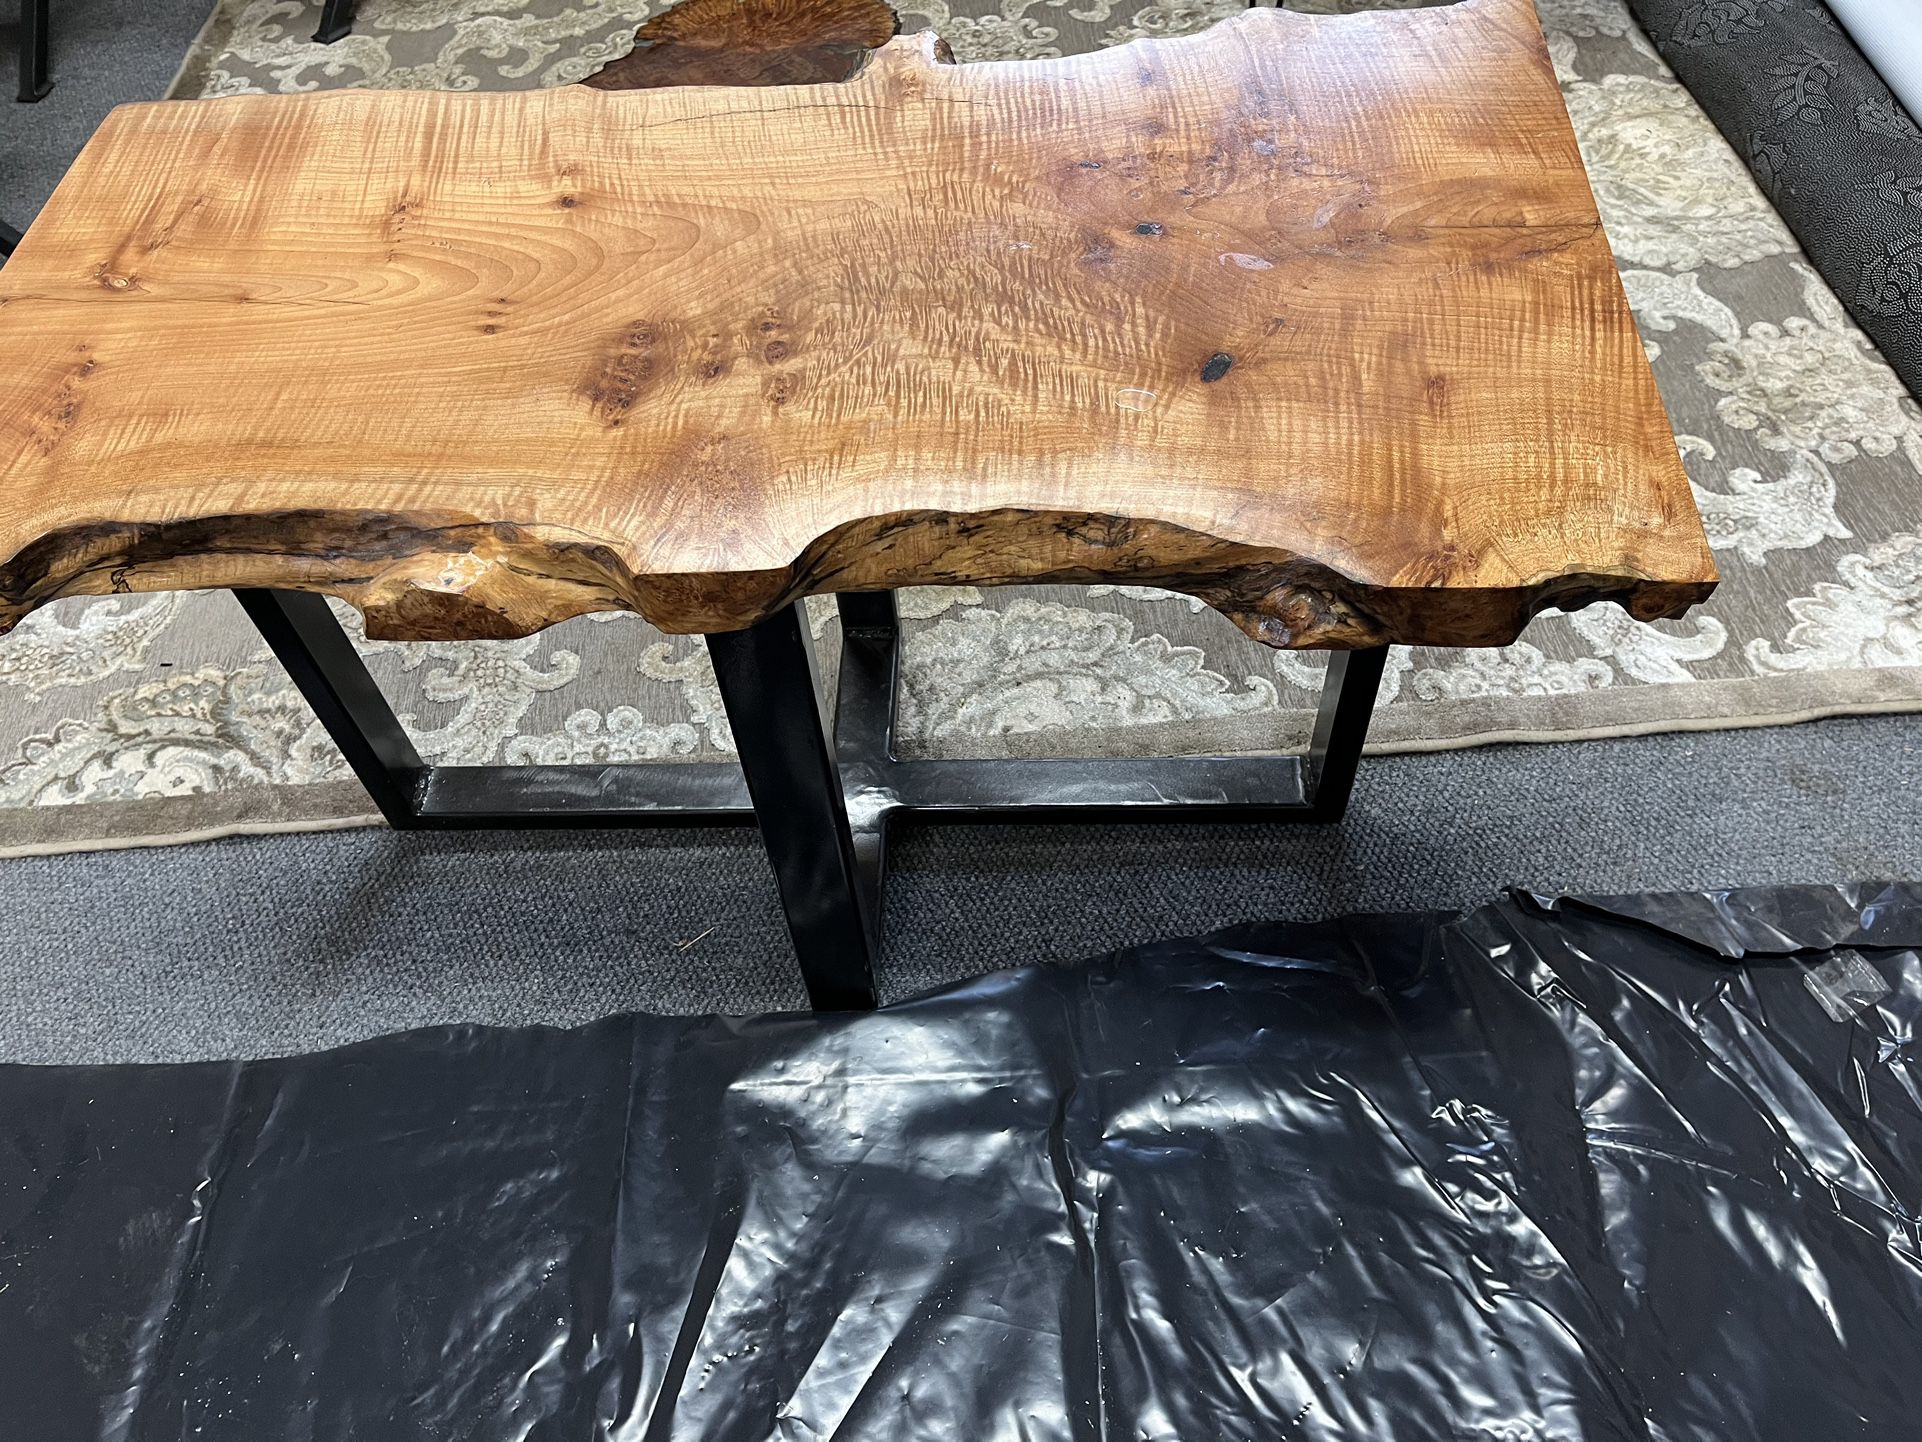 Live Edge Maple Burl coffee table. Has defect priced to sell.